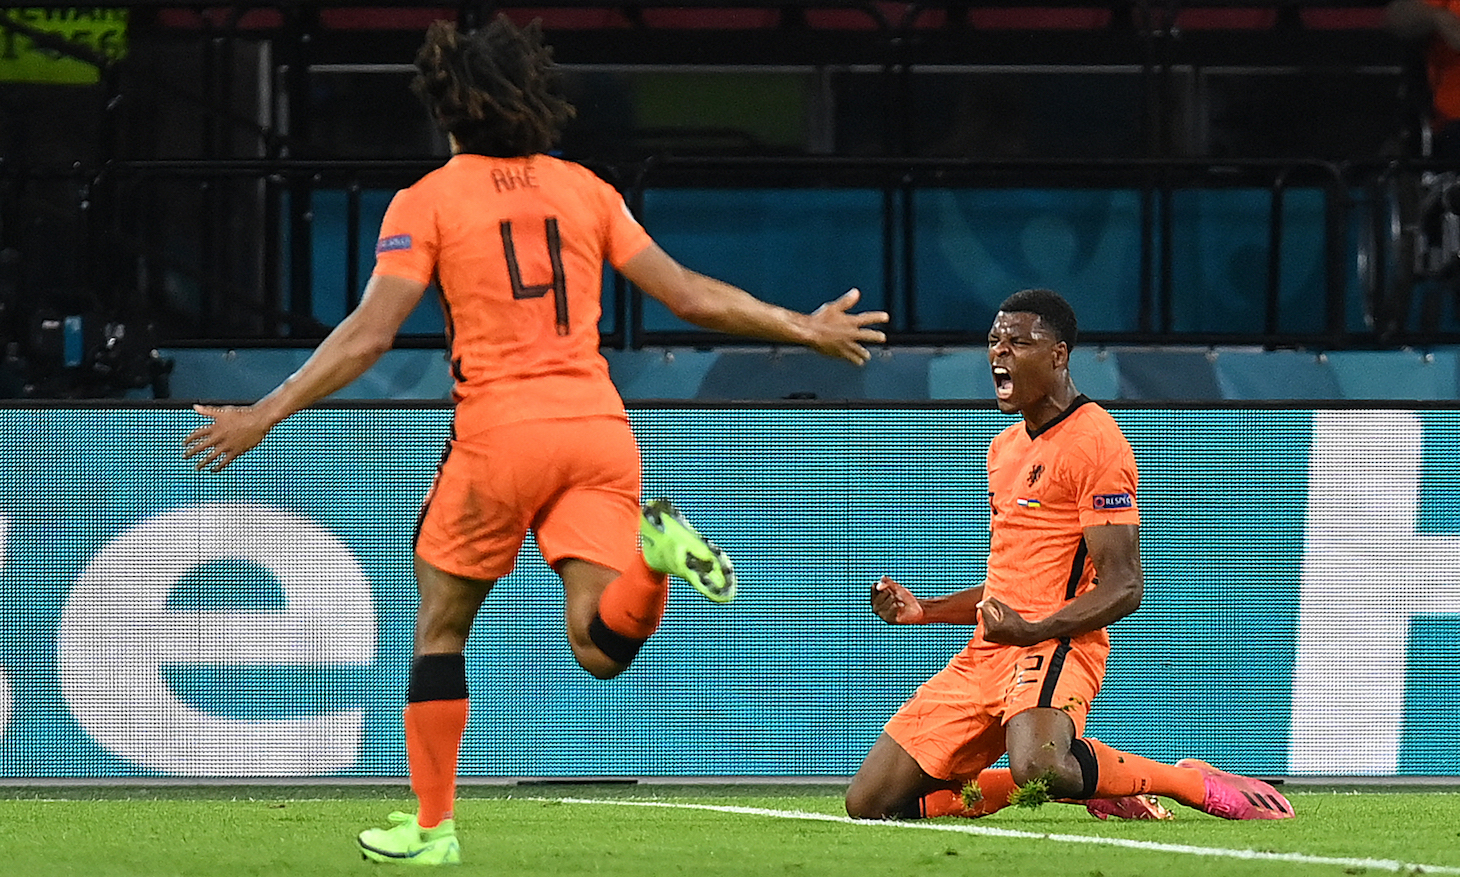 Netherlands' defender Denzel Dumfries (R) celebrates after scoring the third goal during the UEFA EURO 2020 Group C football match between the Netherlands and Ukraine at the Johan Cruyff Arena in Amsterdam on June 13, 2021.